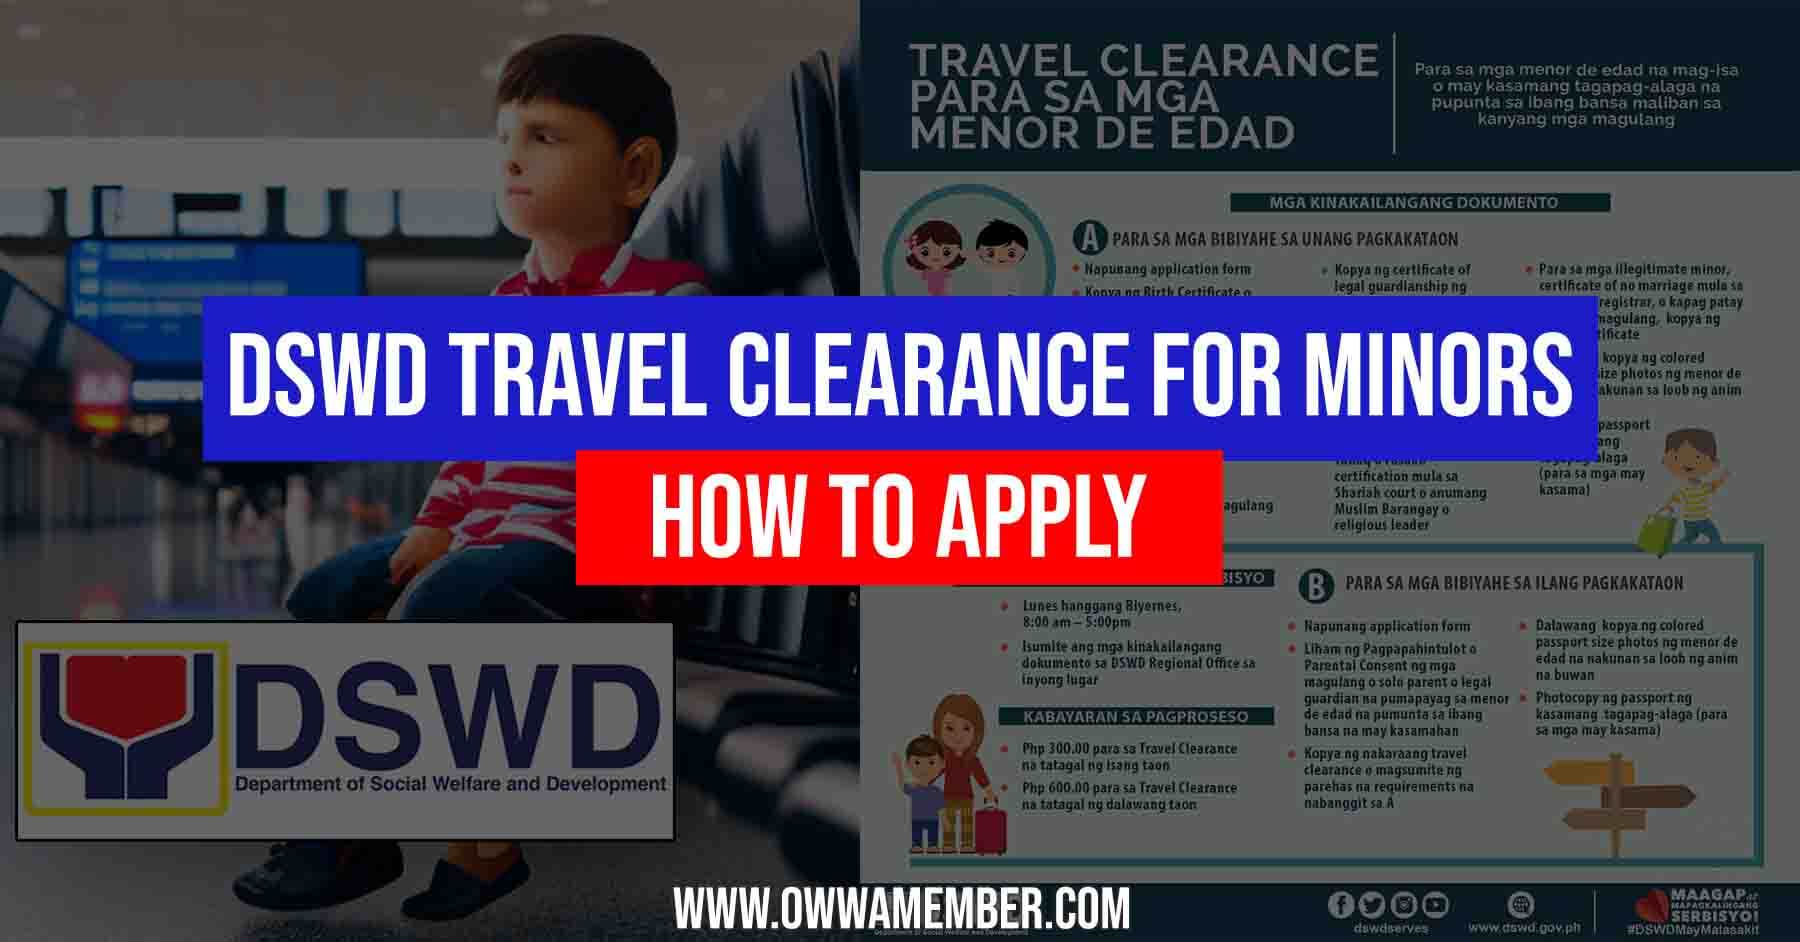 dswd travel clearance for minors 2021 philippines